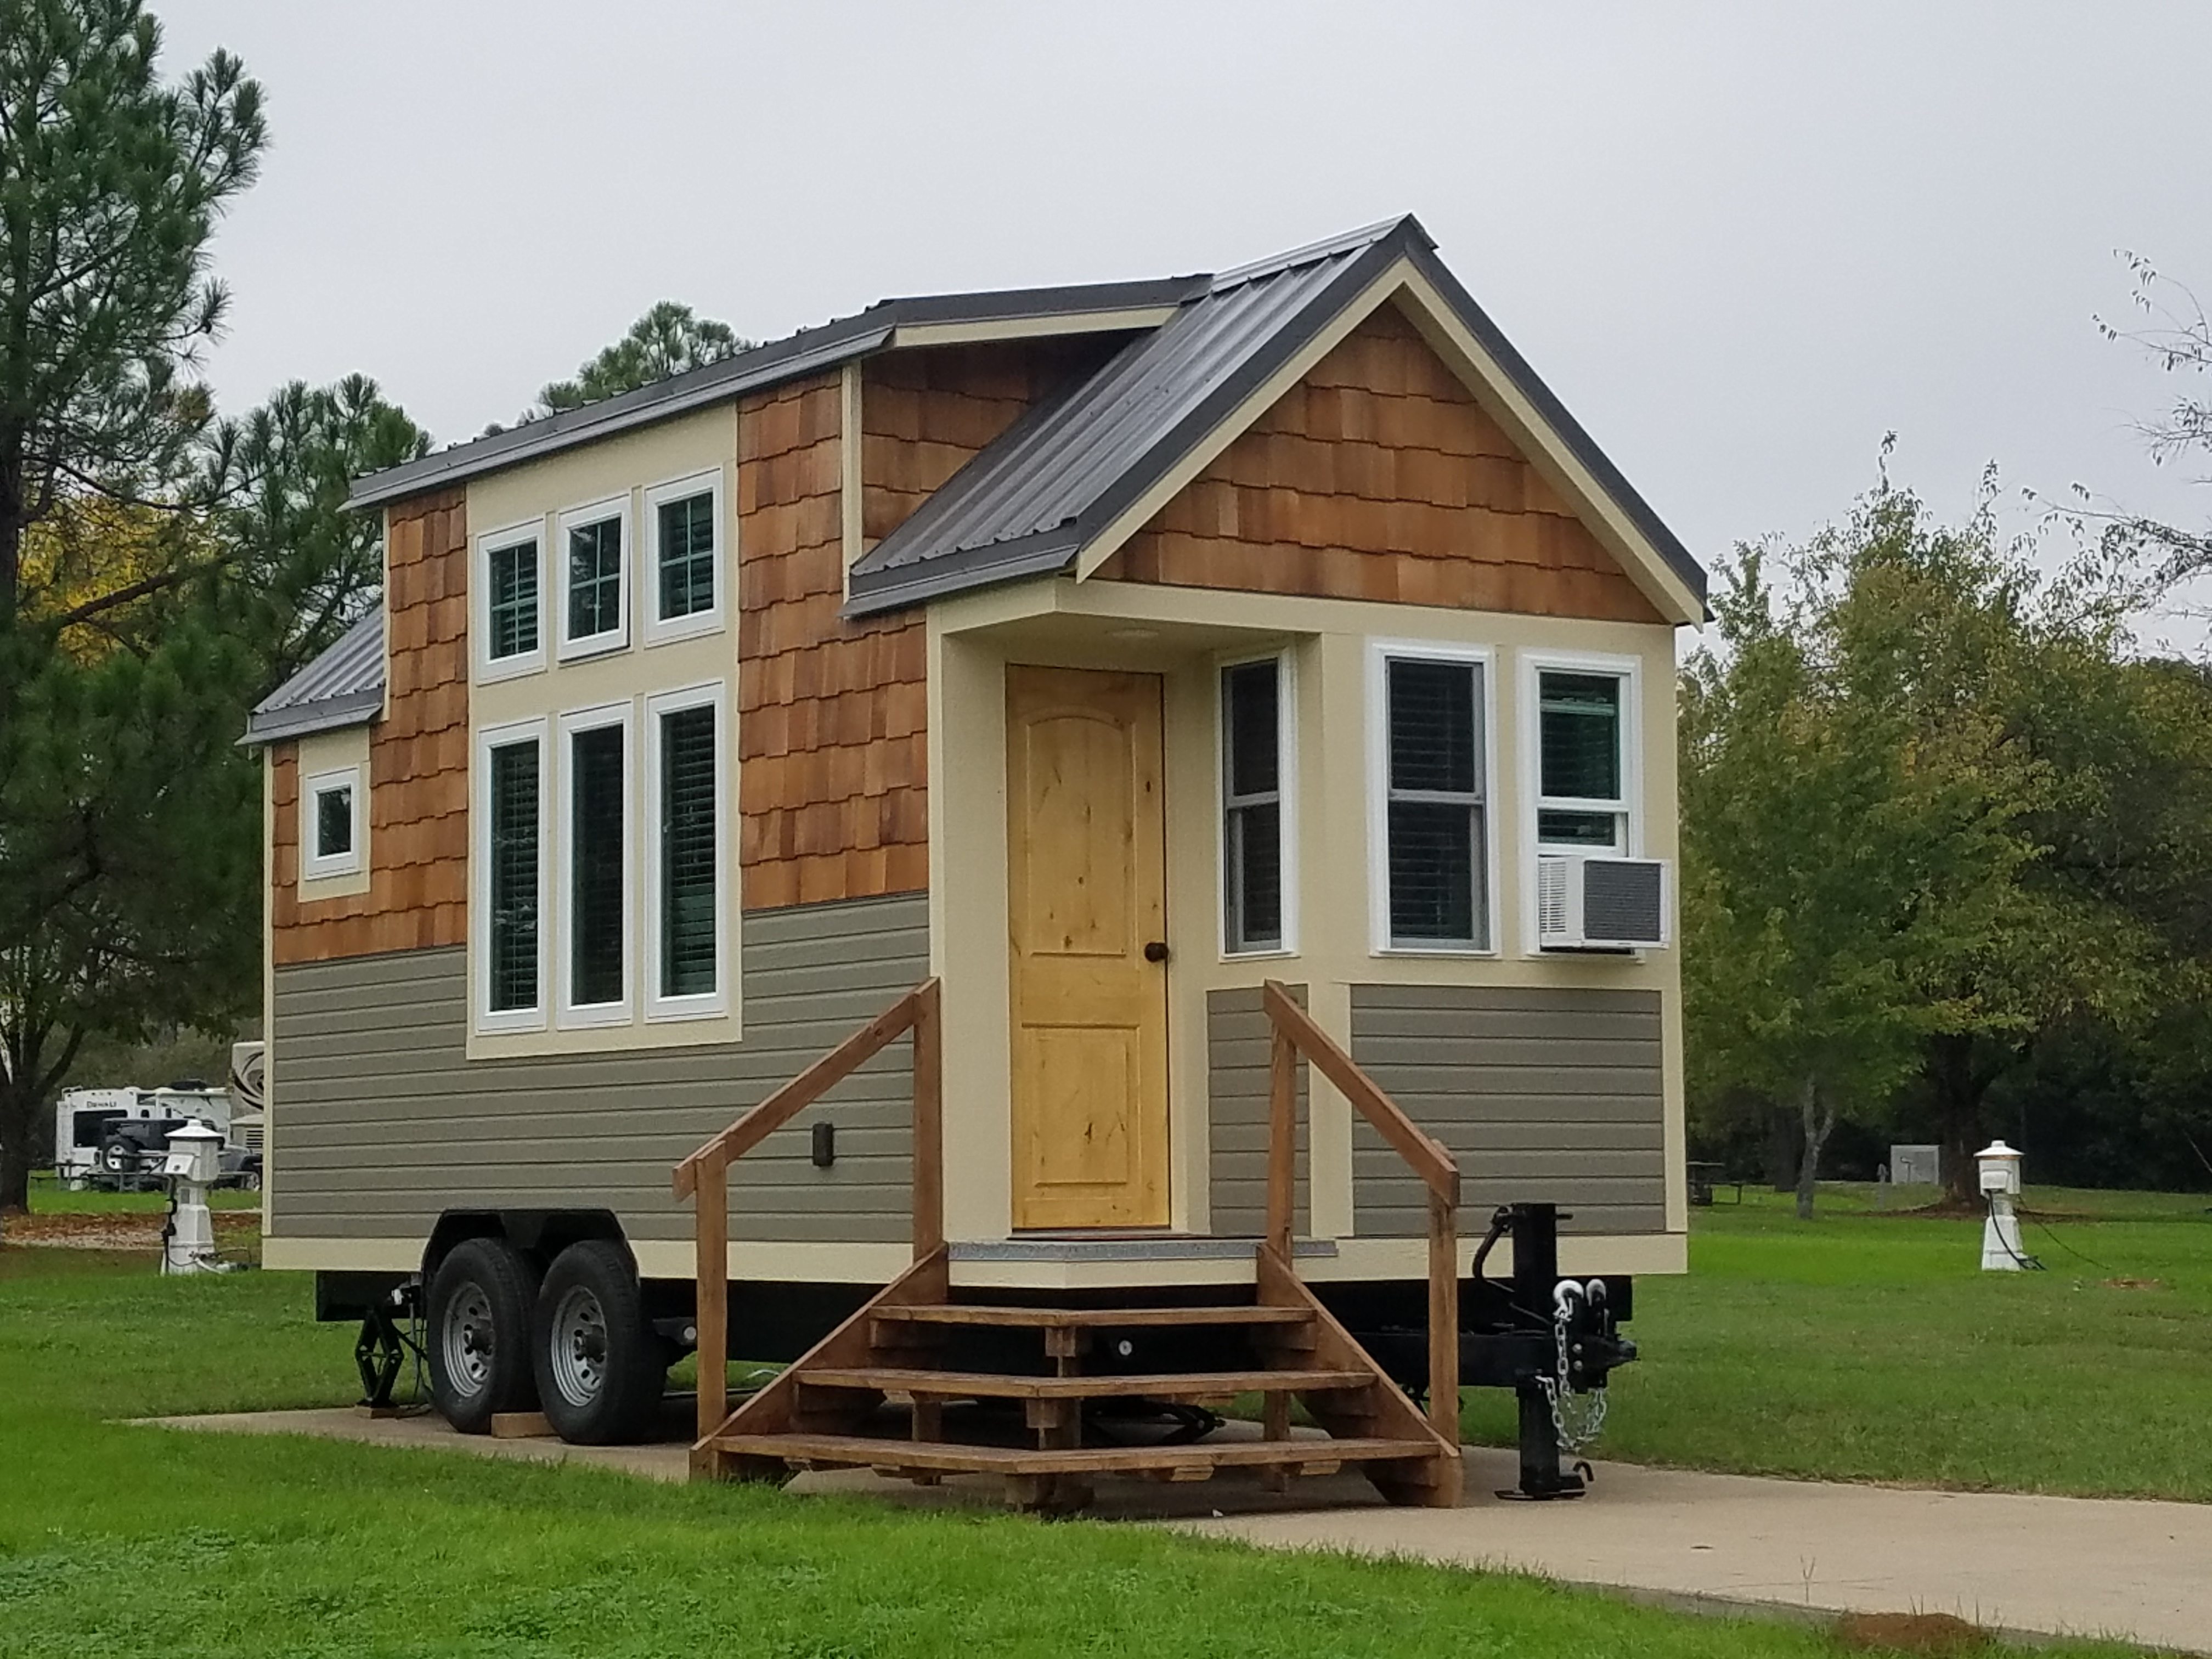 Tiny House Rentals - Tiny Homes for Rent near Me | Mill ...